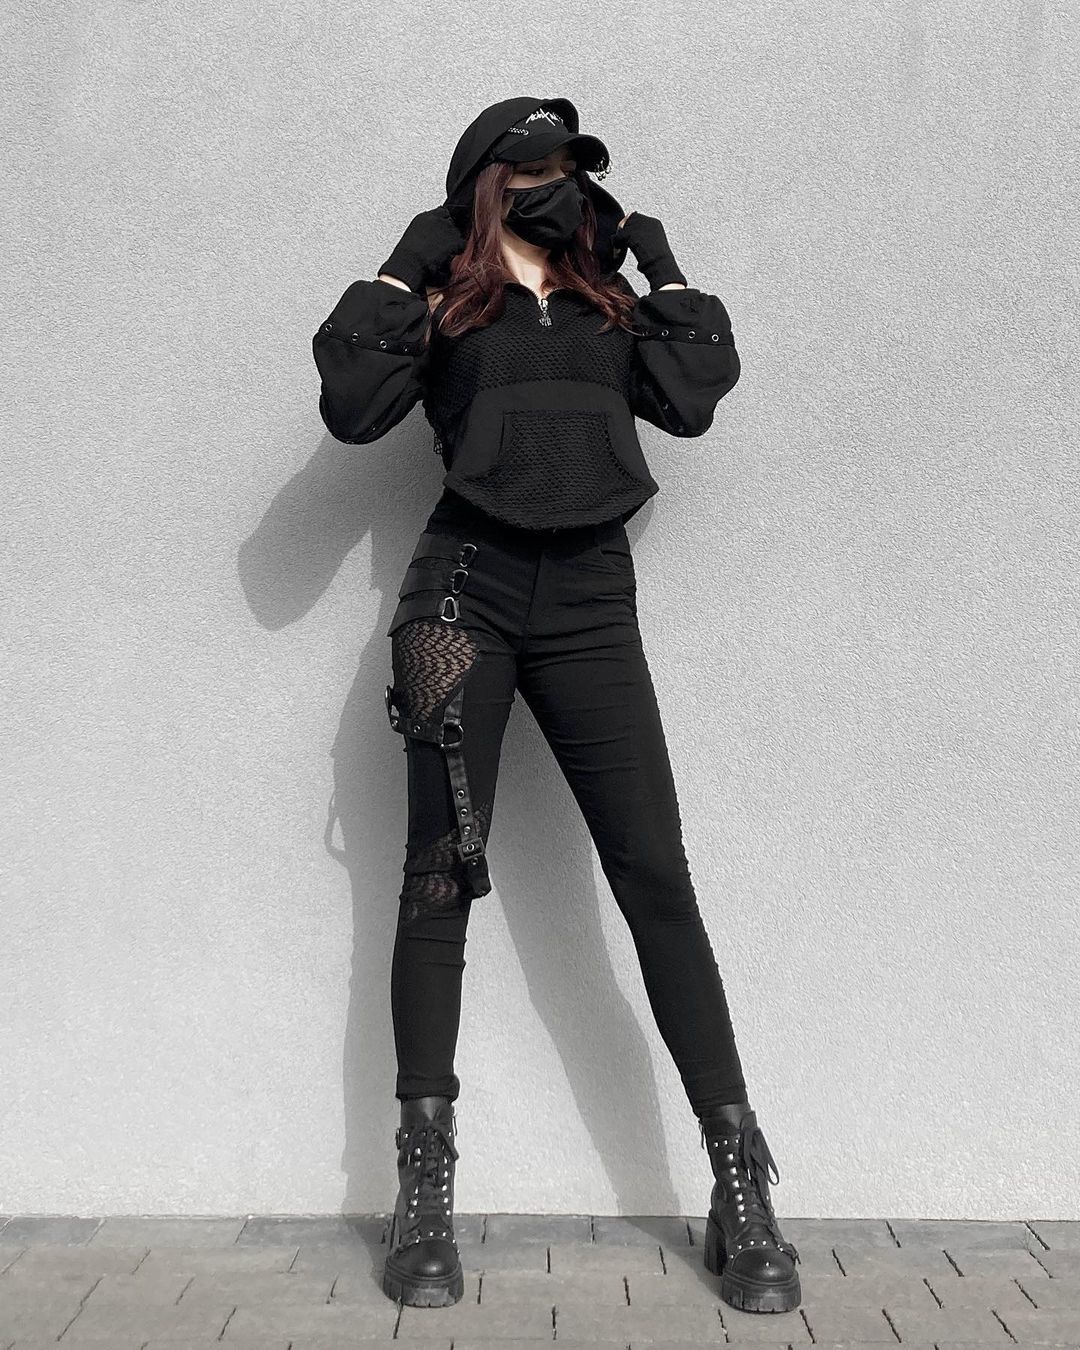 The first time outfit with leggings 🕷️ Yes or No? 🖤
I think it looks great 👀
.
.
hoodie leggings: @punkravestore @shasilo_clothing
shoes: @altercore @zibrucom
.
.
.
#shasilo #shasiloclothing #shasiloswirl
#alternative #alternatywka #darkwear #gothgirl #fashion #photography #streetwear #redhair #inspiration